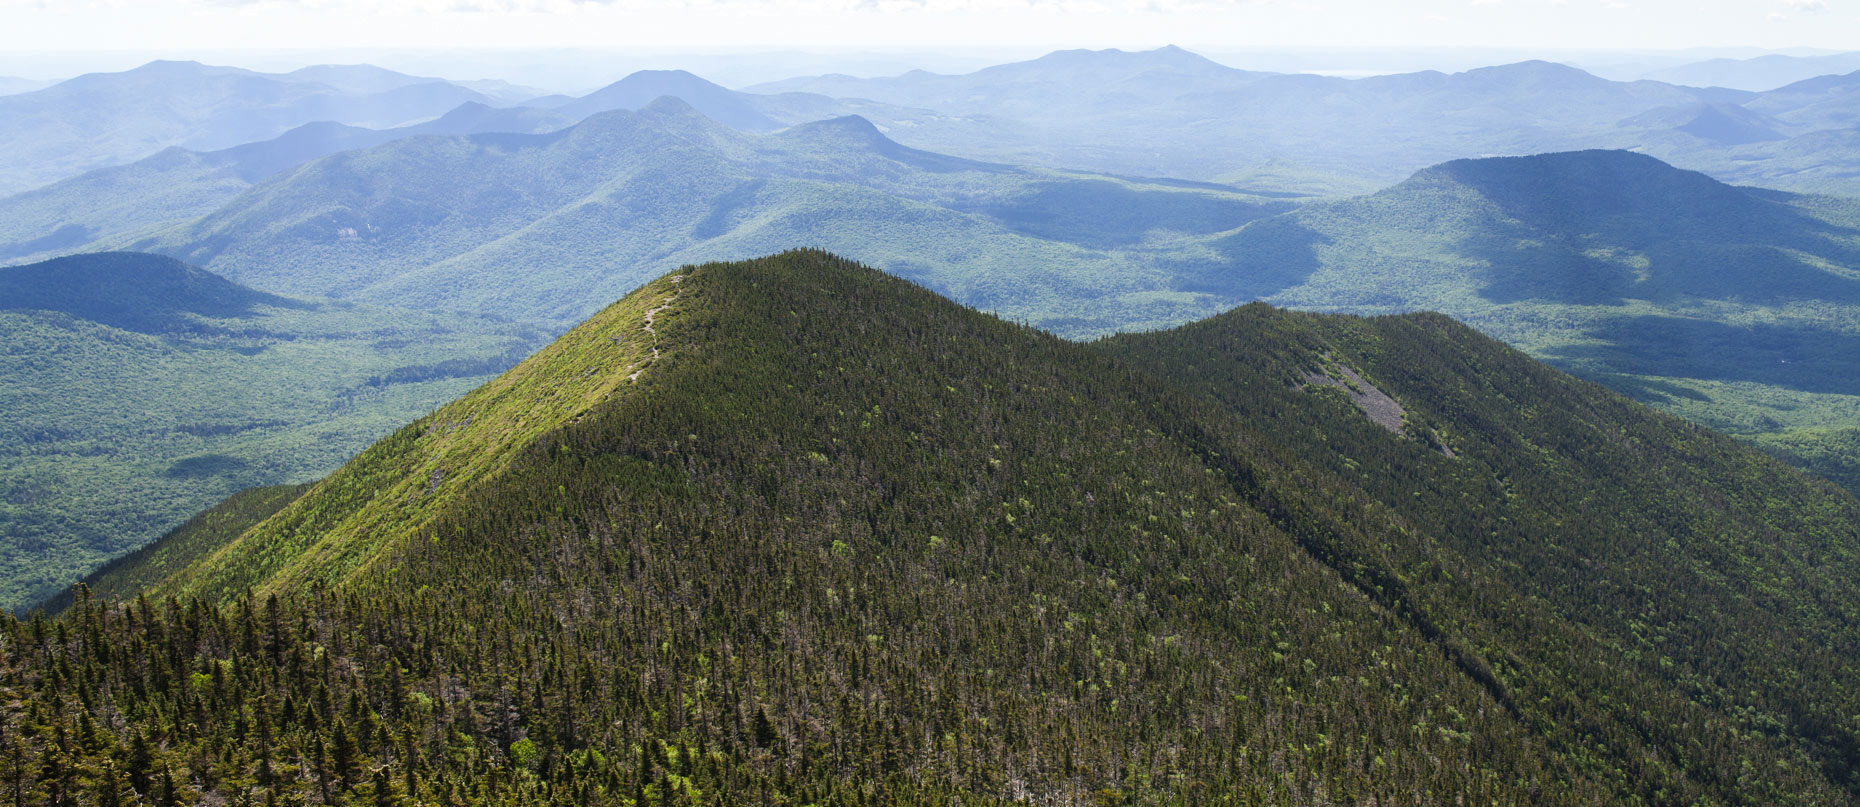 Hike up Mount Carrigain in the White Mountain National Forest